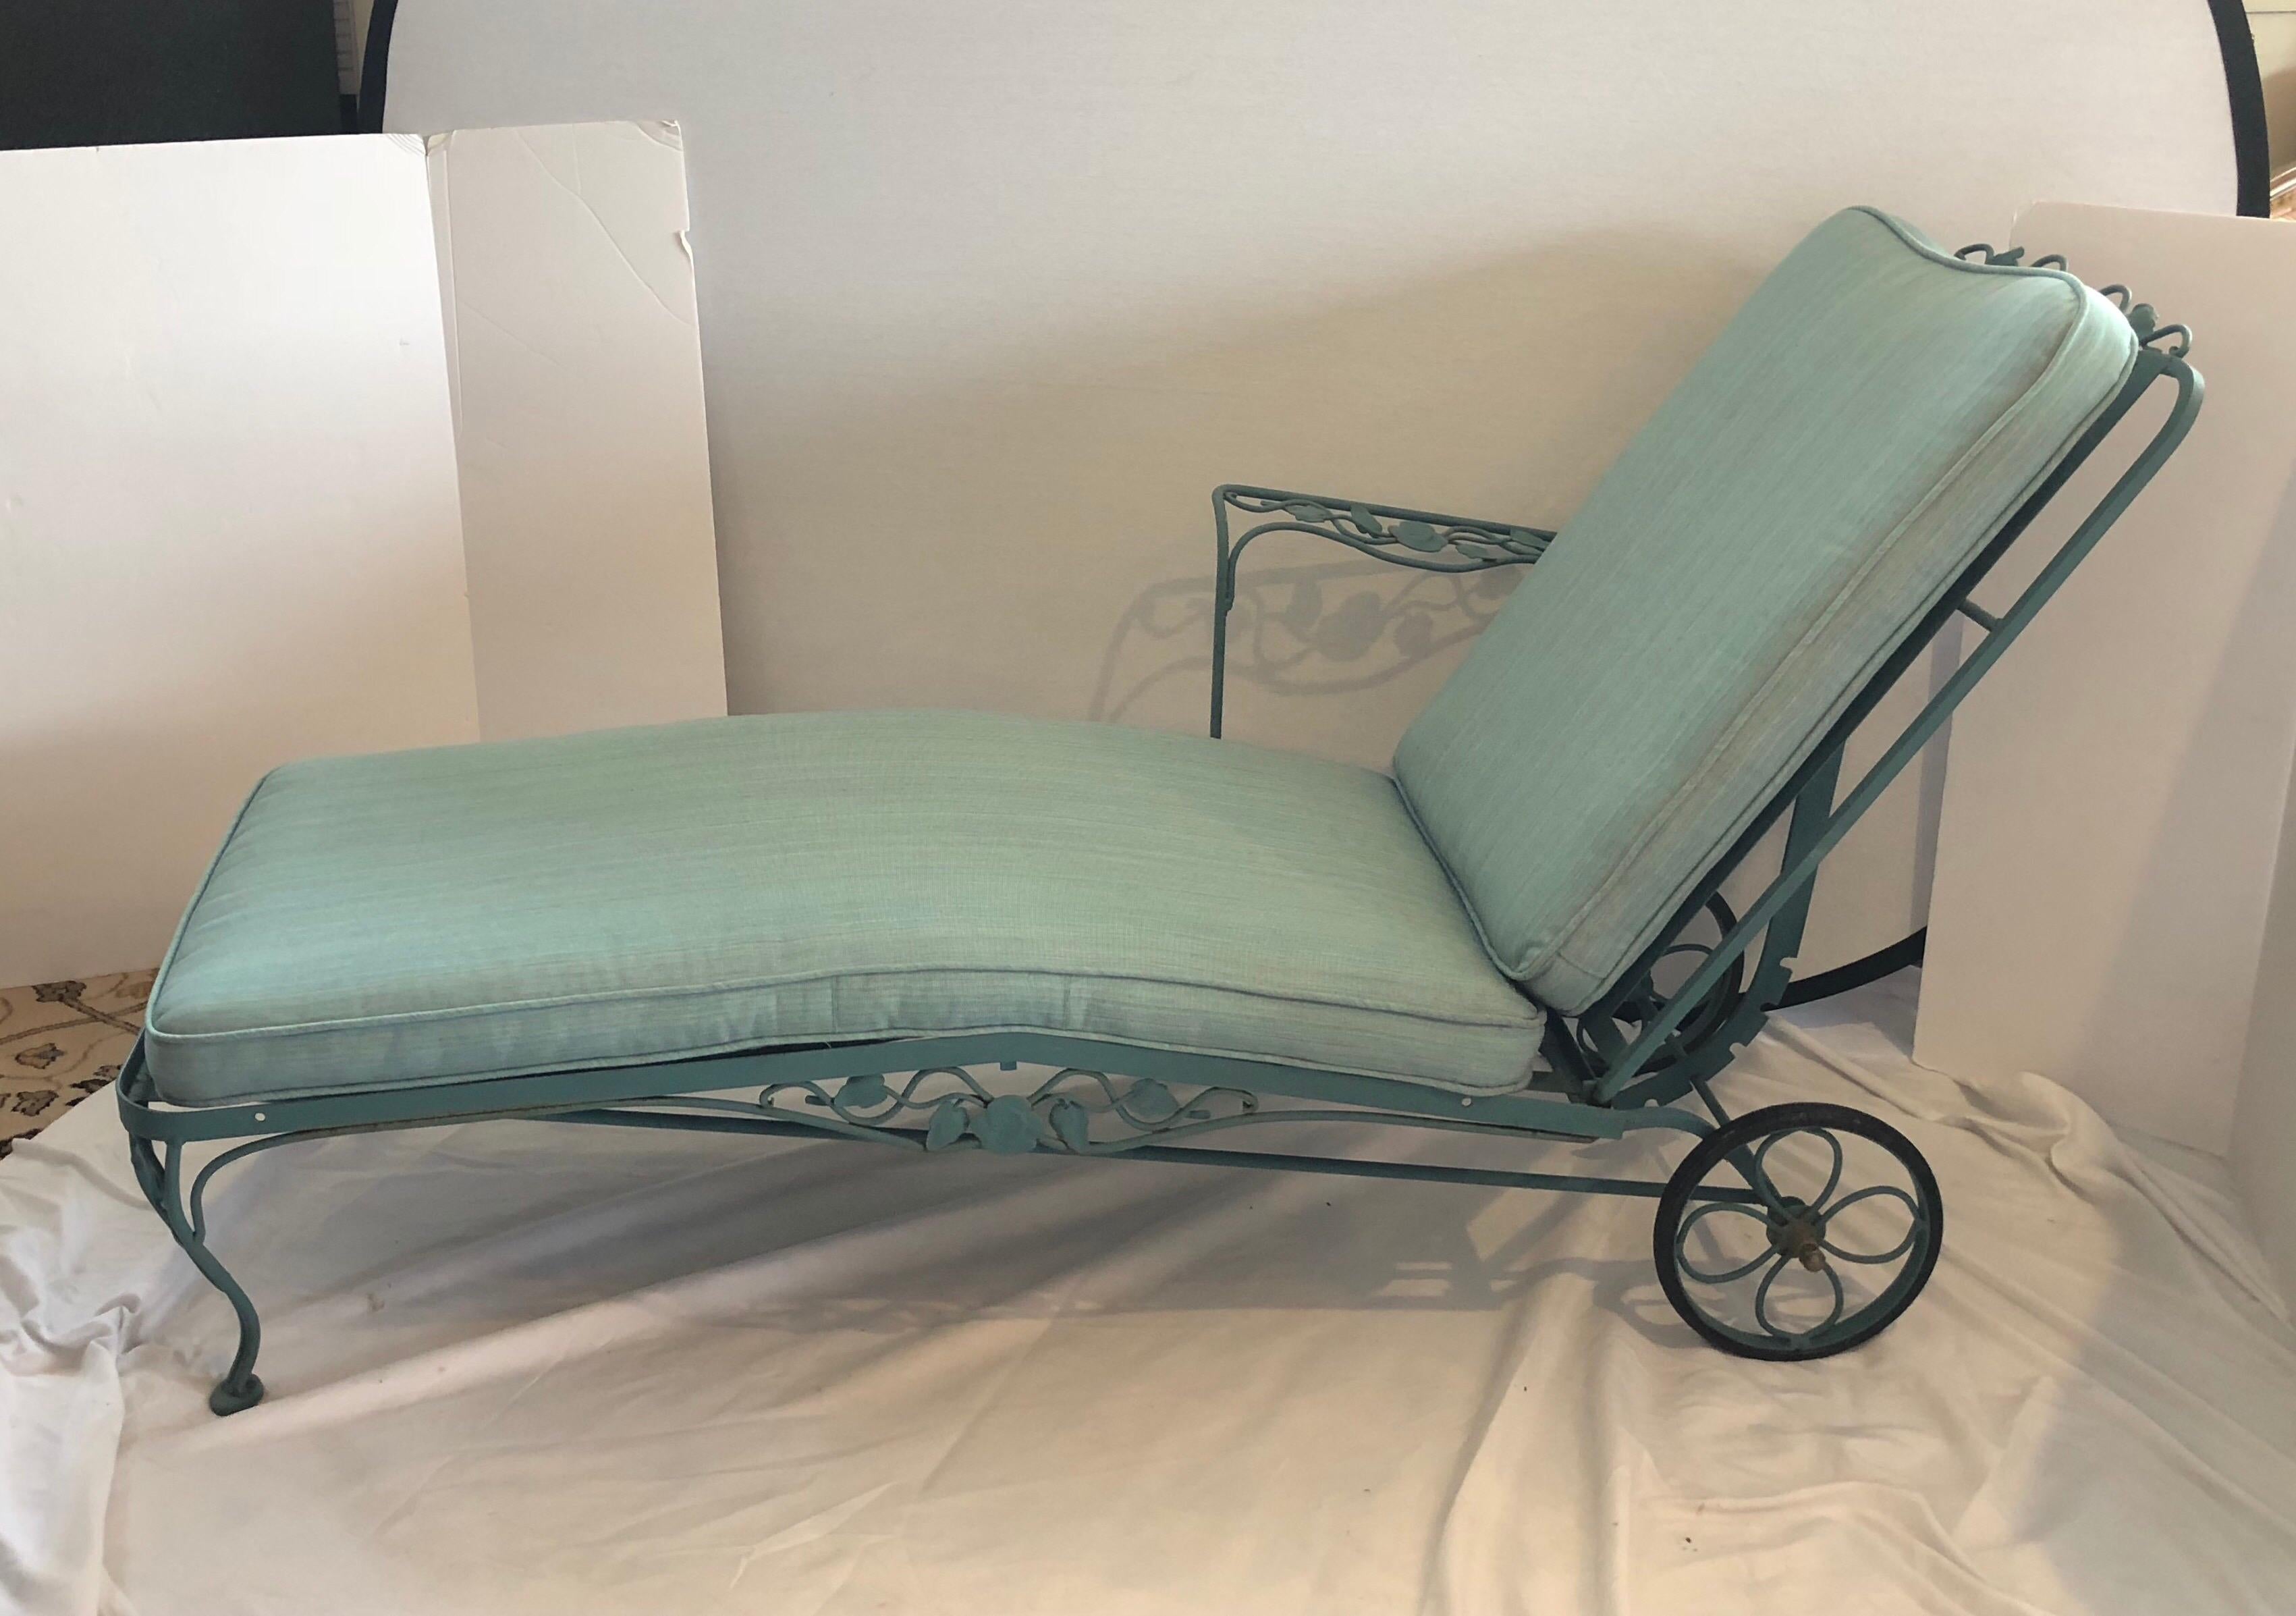 Rare Russell Woodard chaise longue with two matching nesting tables. Gorgeous metalwork and on wheels at one end for ease of movement. Has new seafoam green cushion.